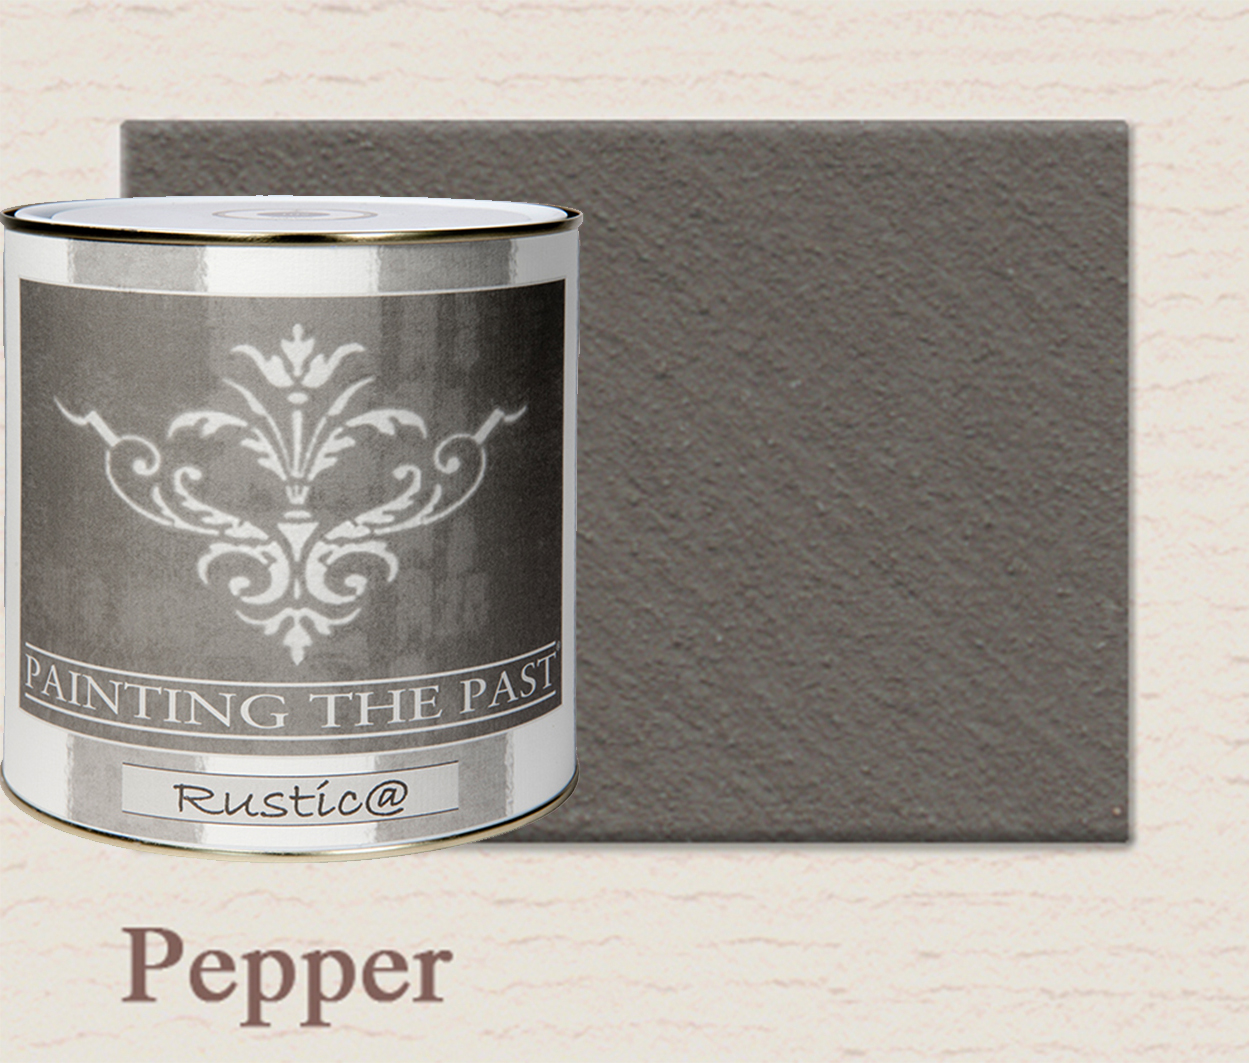 Painting The Past Rustica Pepper